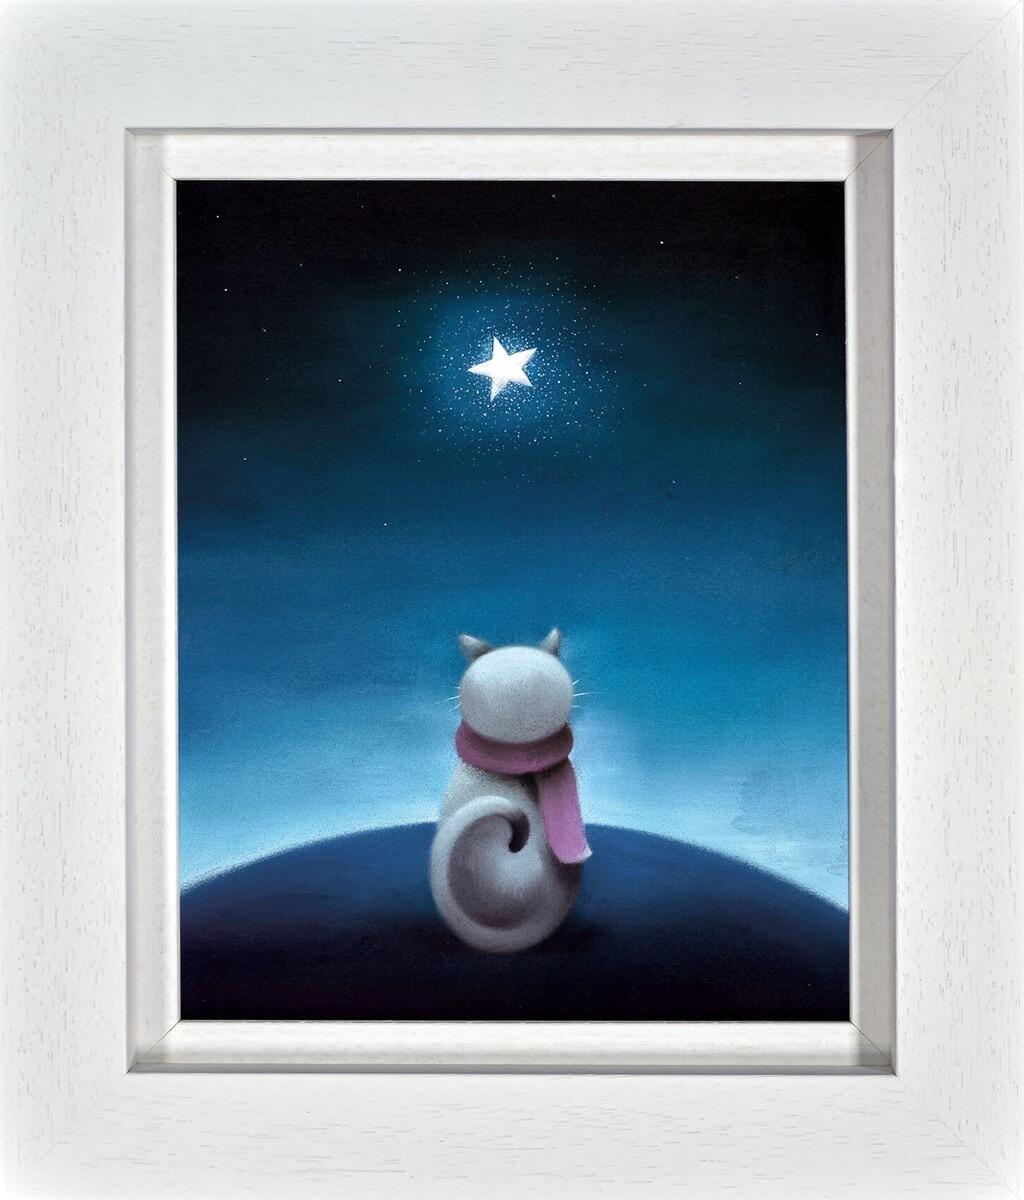 Moonlighting I by Doug Hyde - Limited Edition art print ZHYD752